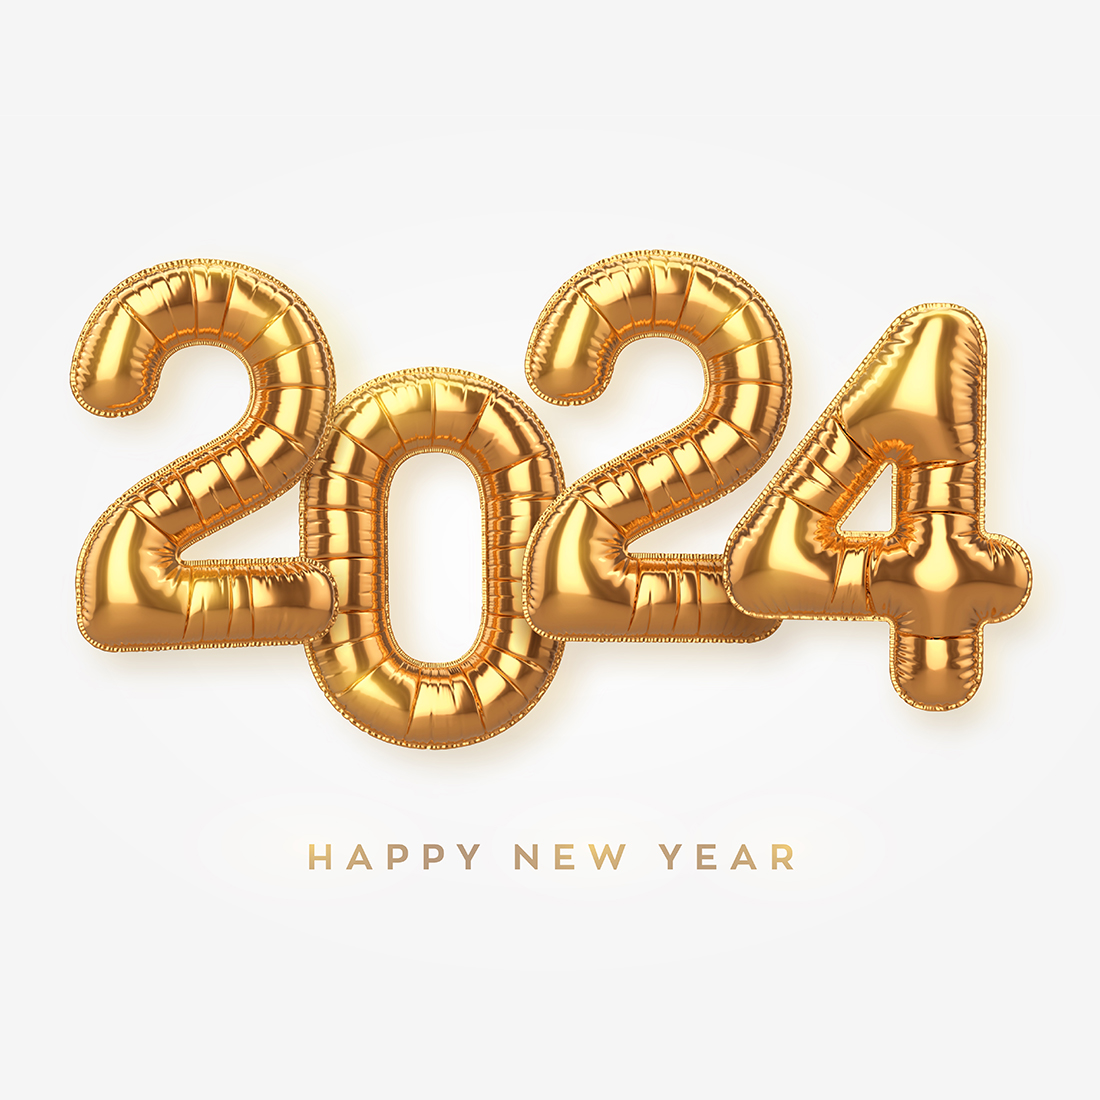 Golden foil balloon numbers 2024 on white background High detailed 3D realistic gold foil helium balloons Vector illustration preview image.